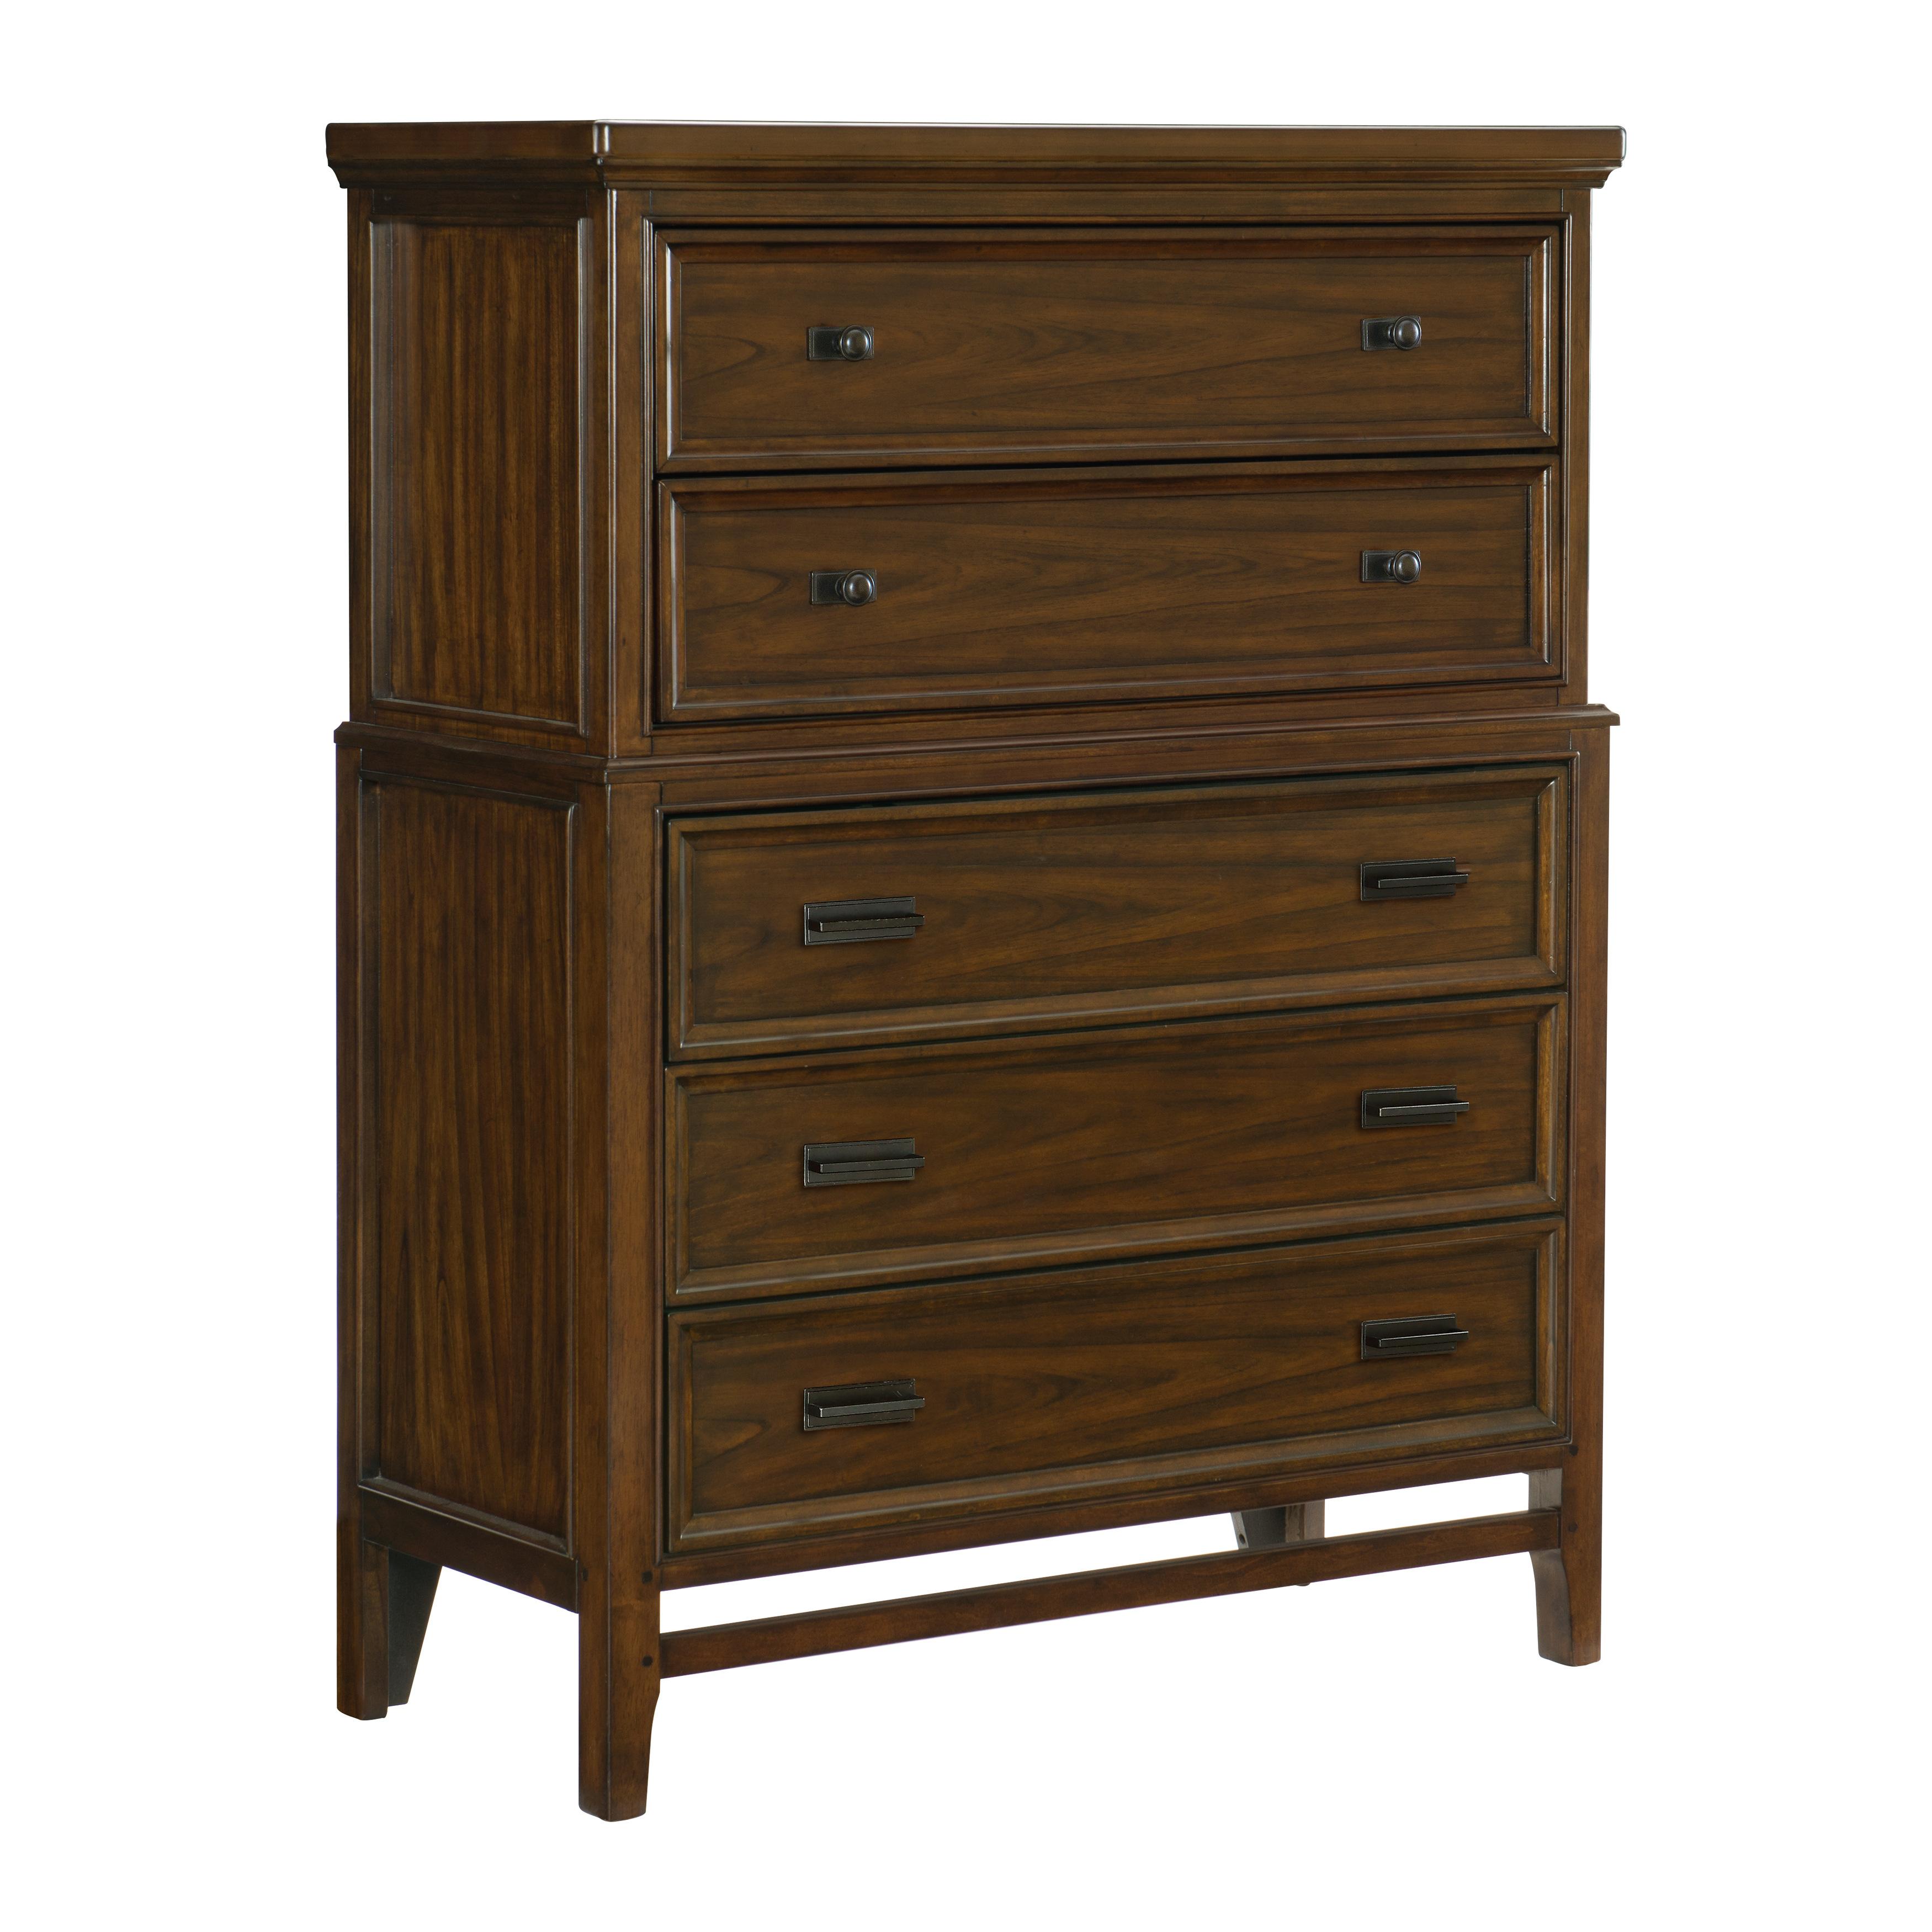 Classic Chest 1649-9 Frazier Park 1649-9 in Cherry 